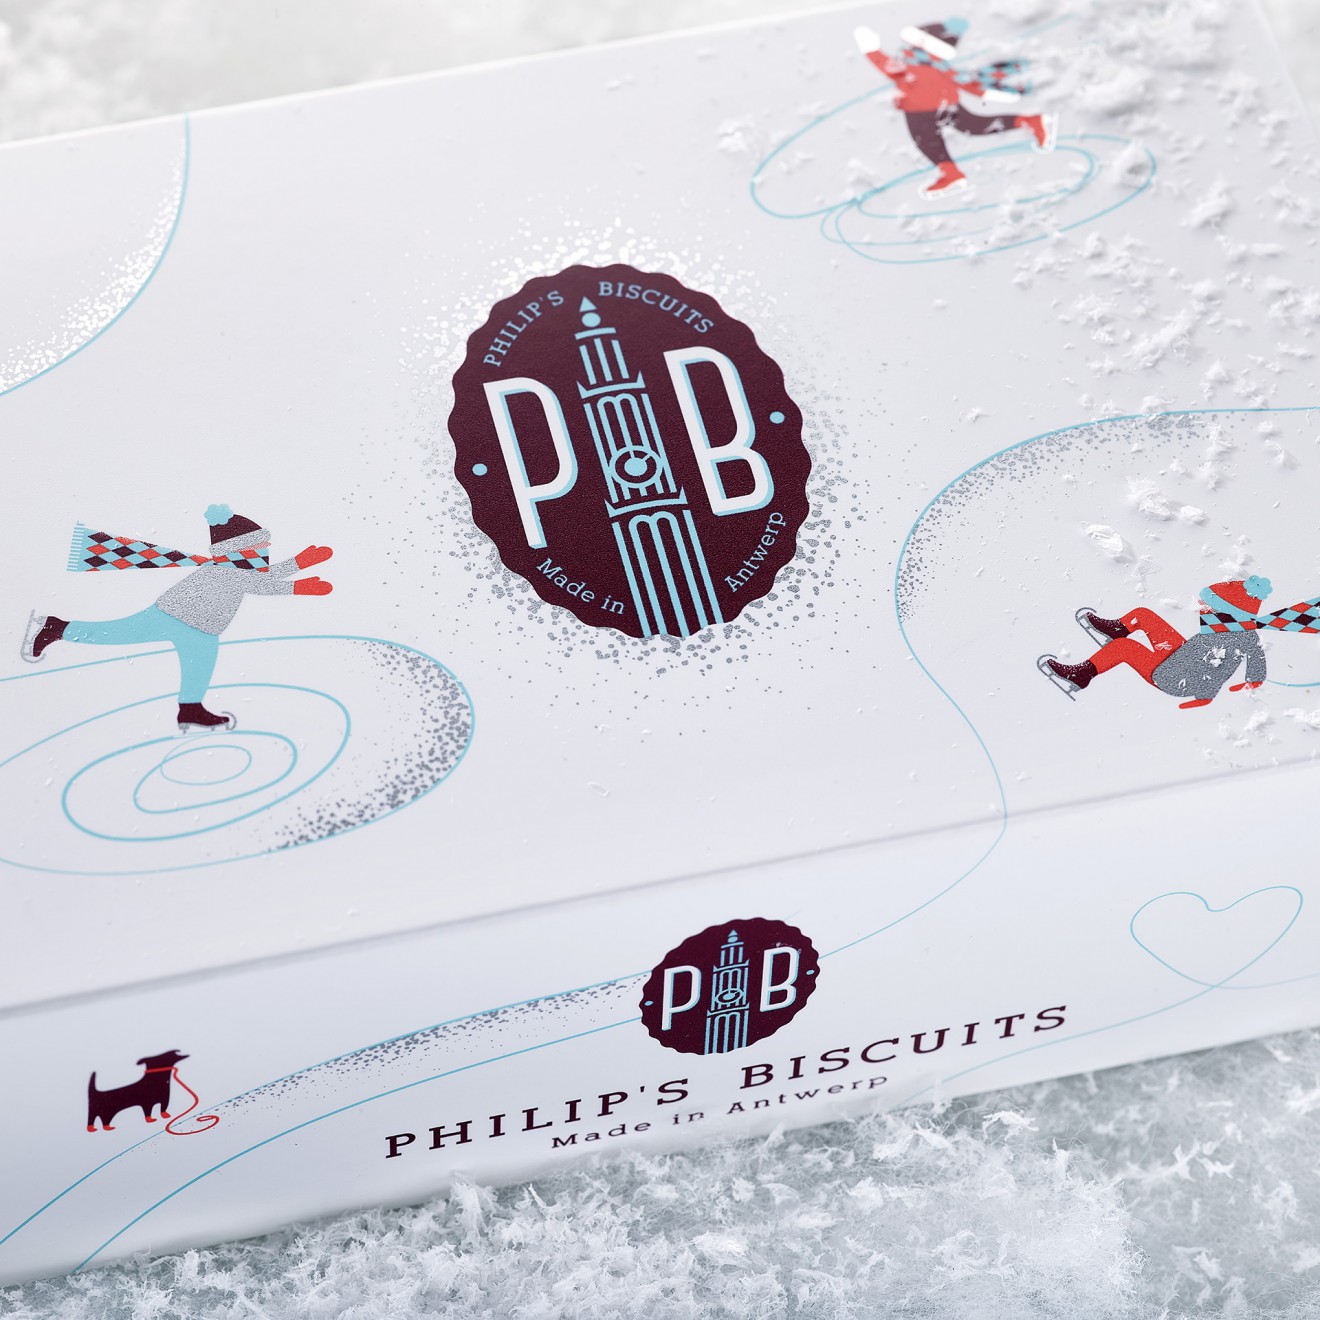 Quatre Mains package design - end of year, pb, philips biscuits